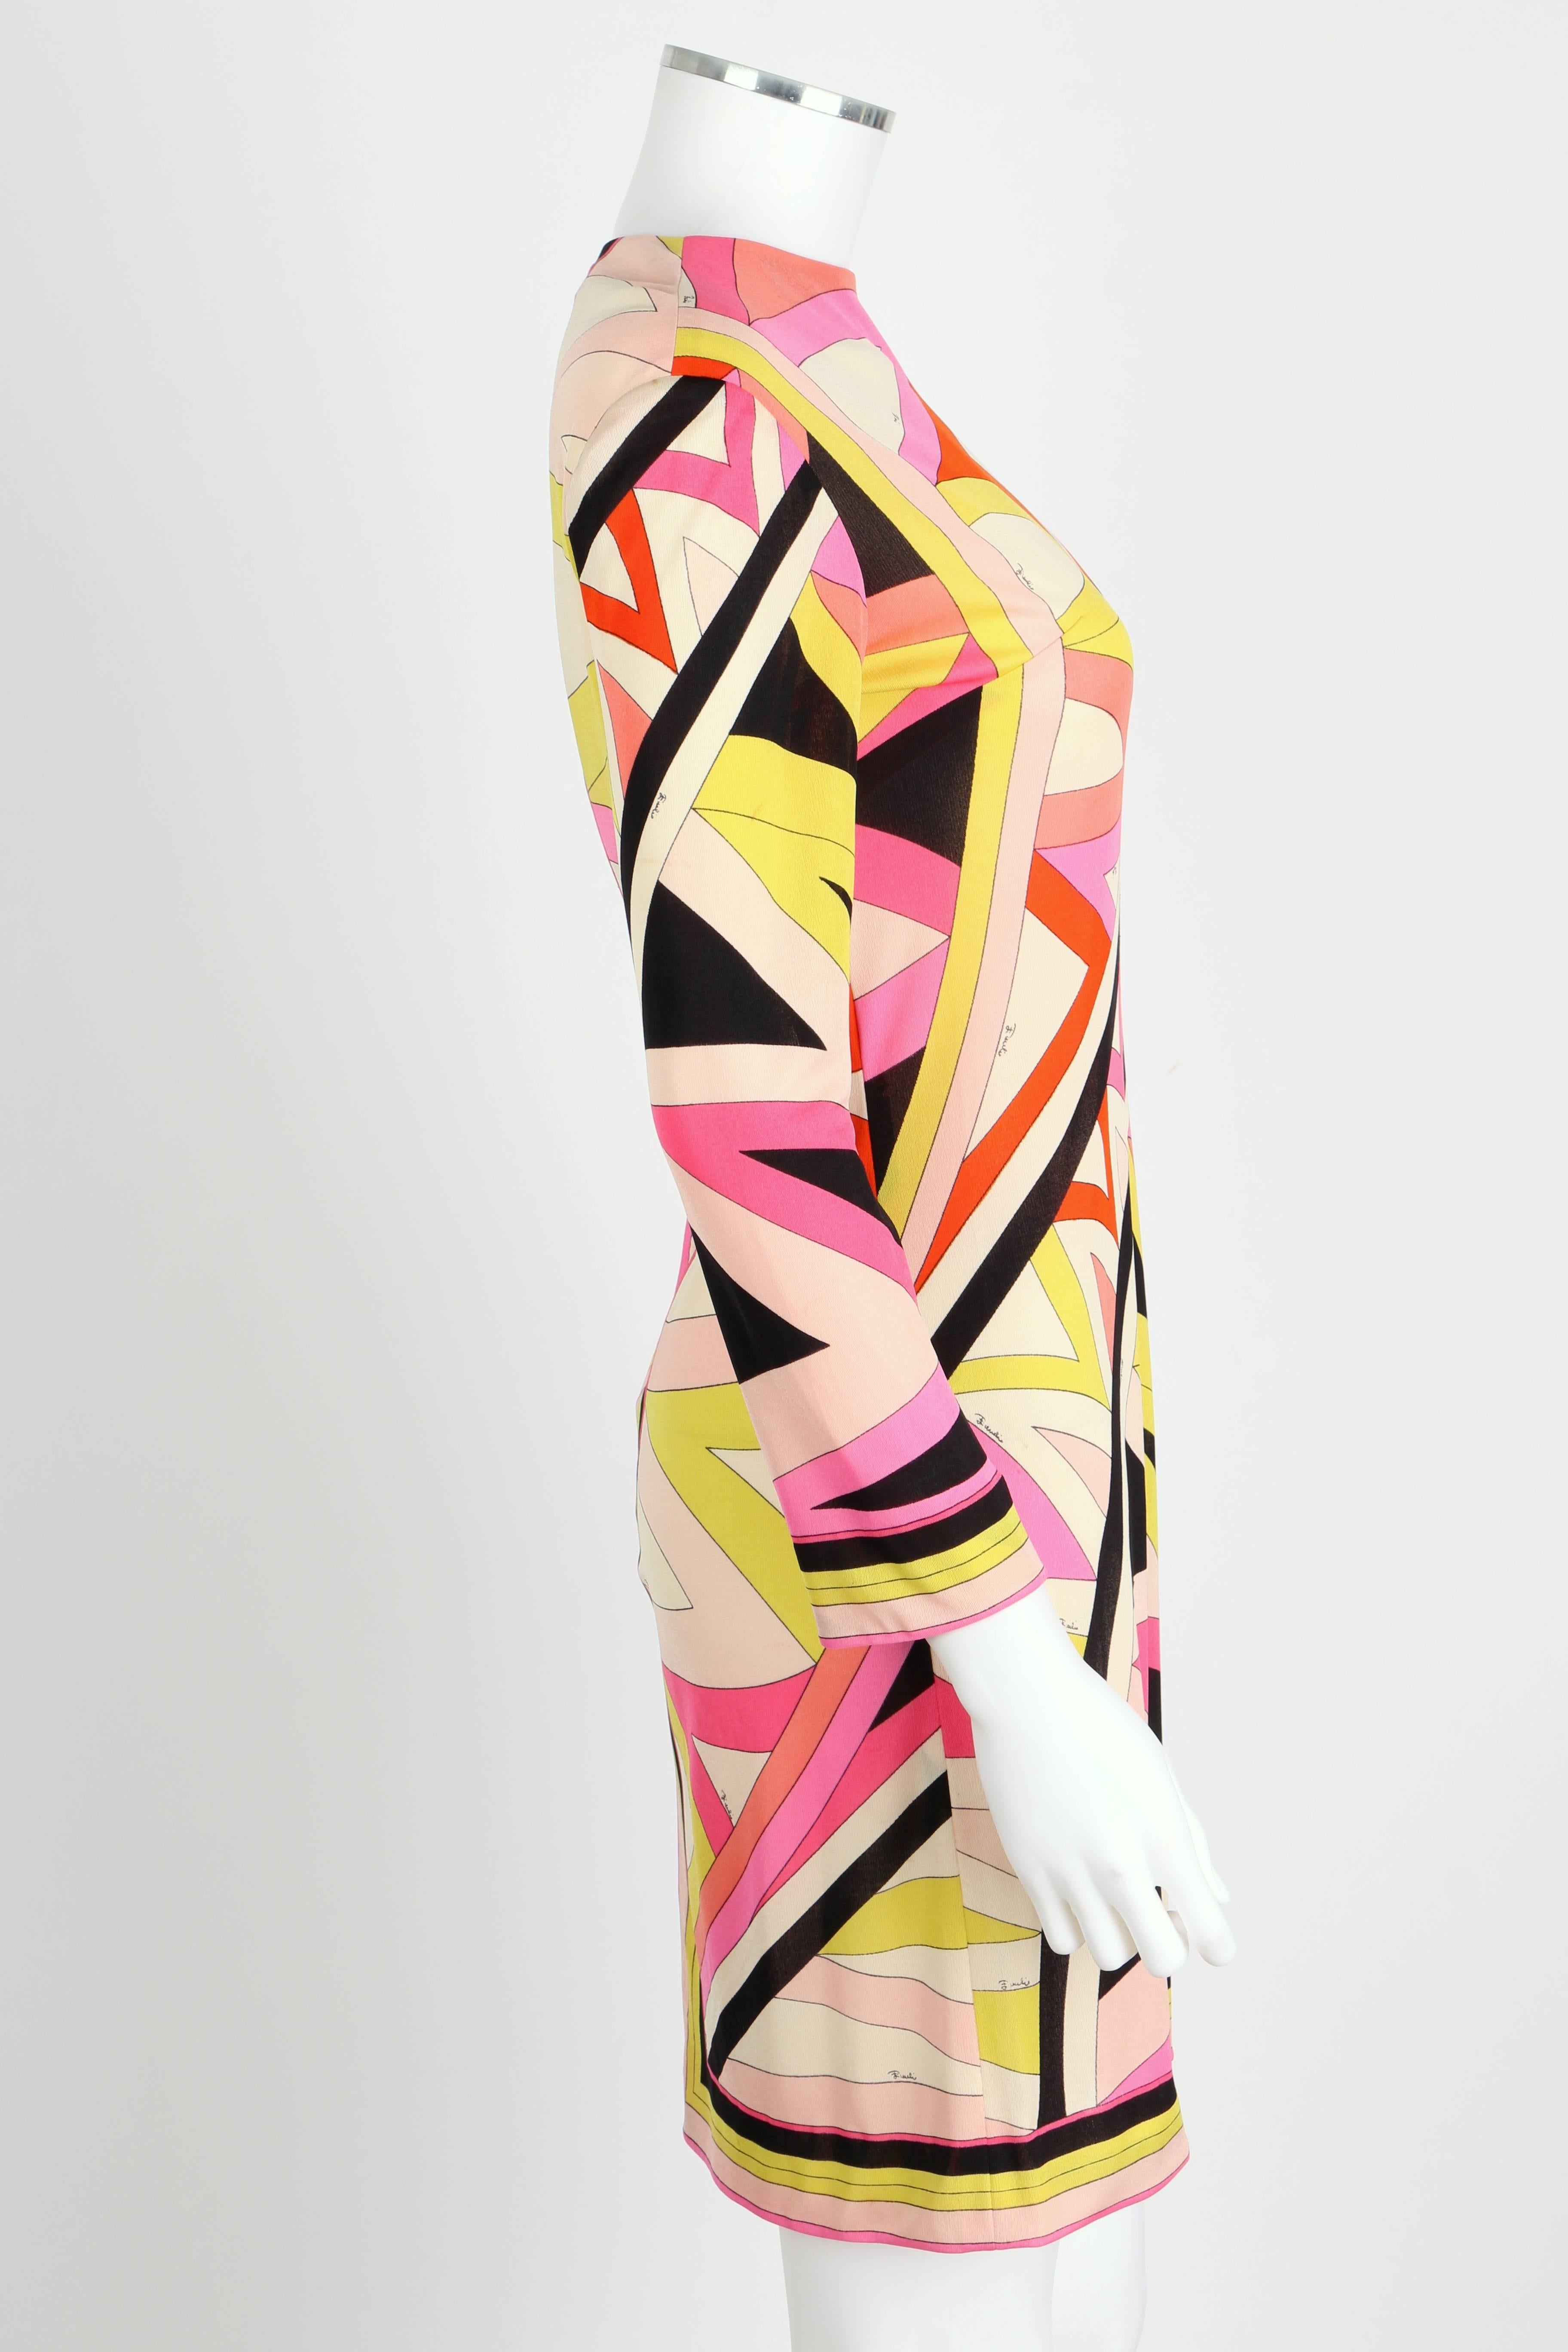 emilio pucci dress in floral and abstract geometric printed silk jersey